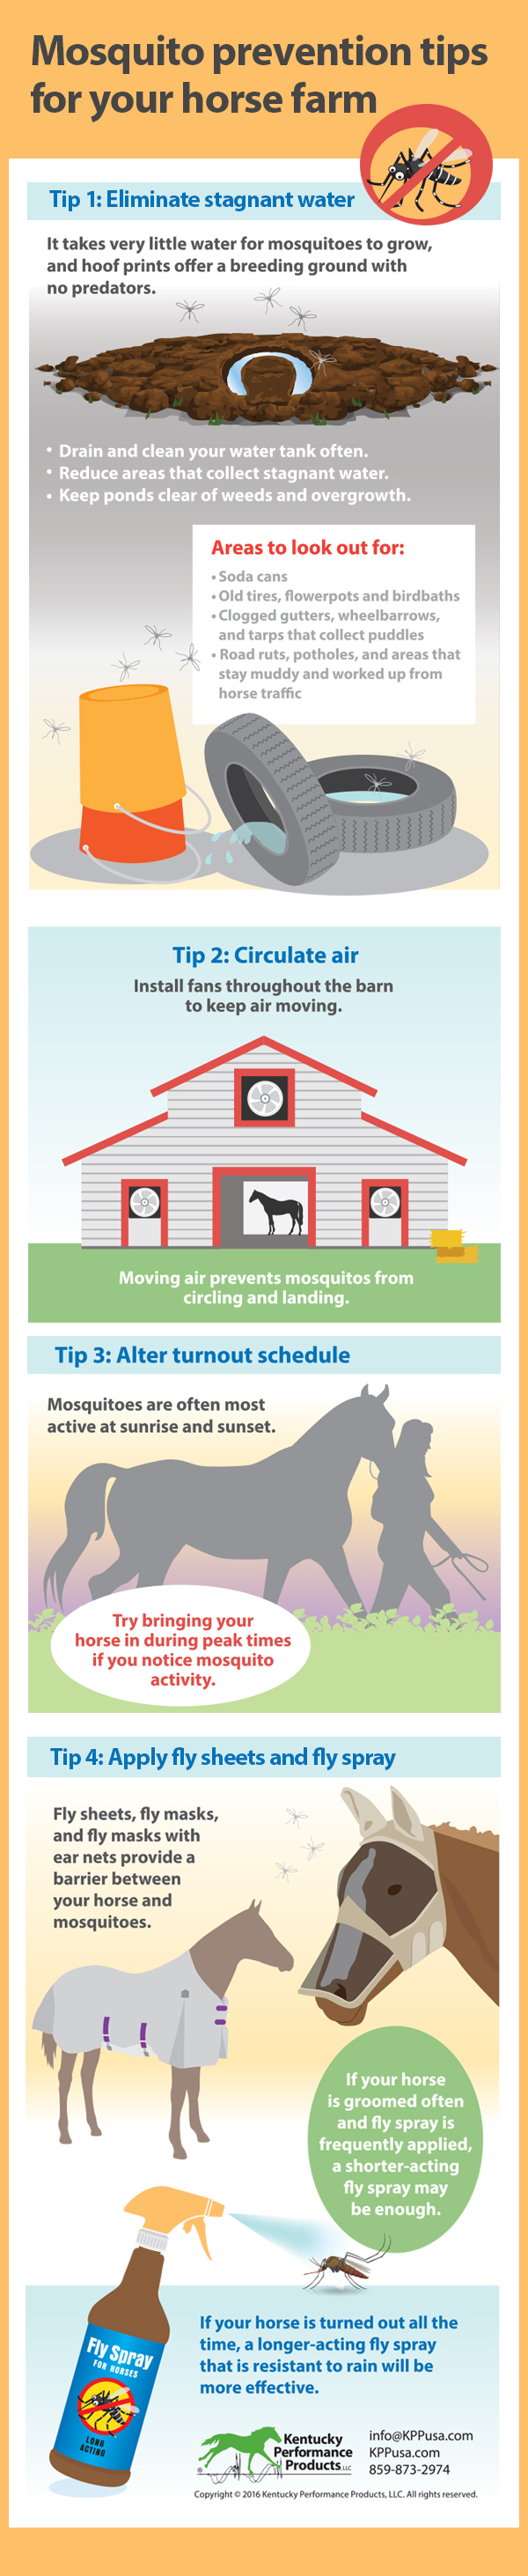 Mosquito-prevention-tips-for-your-horse-farm-16-186